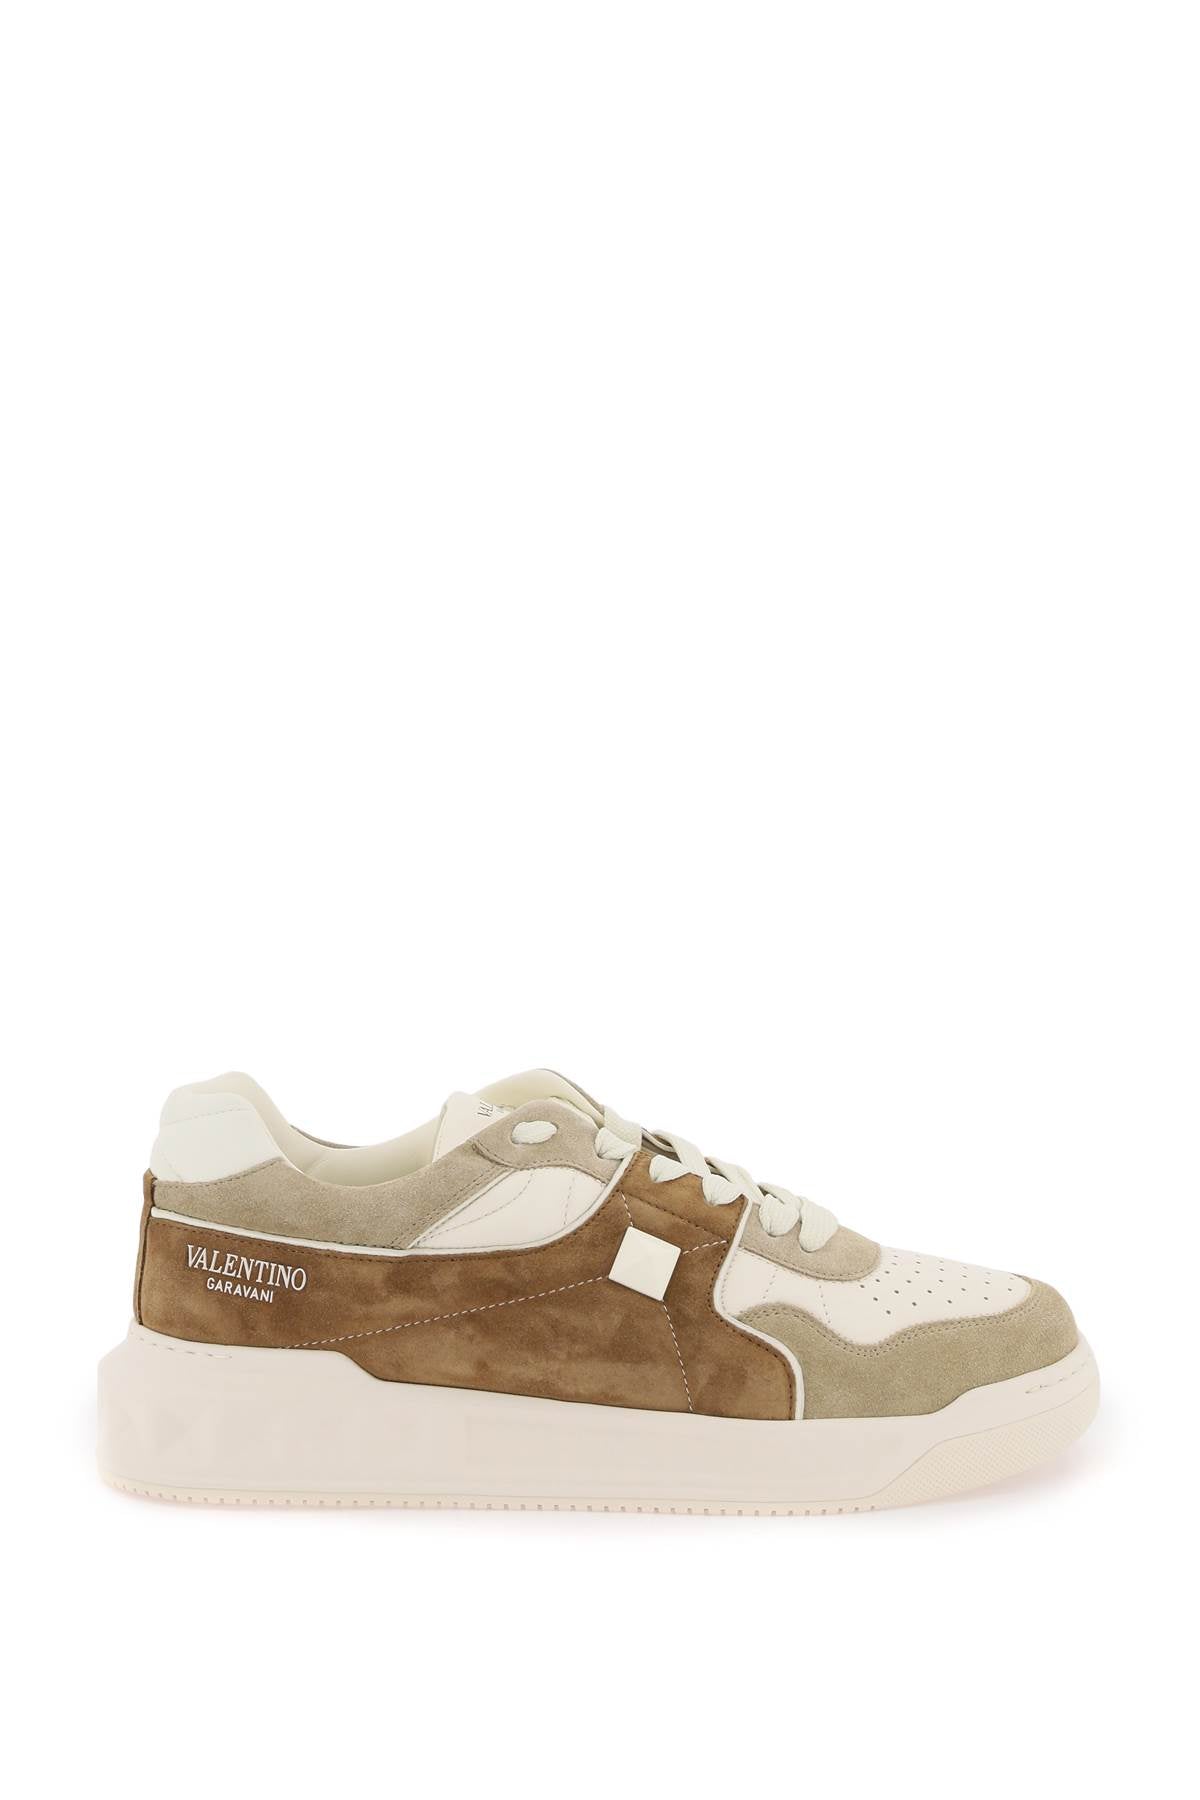 Shop Valentino Men's One Stud Crust And Nappa Leather Sneakers In Mixed Colours